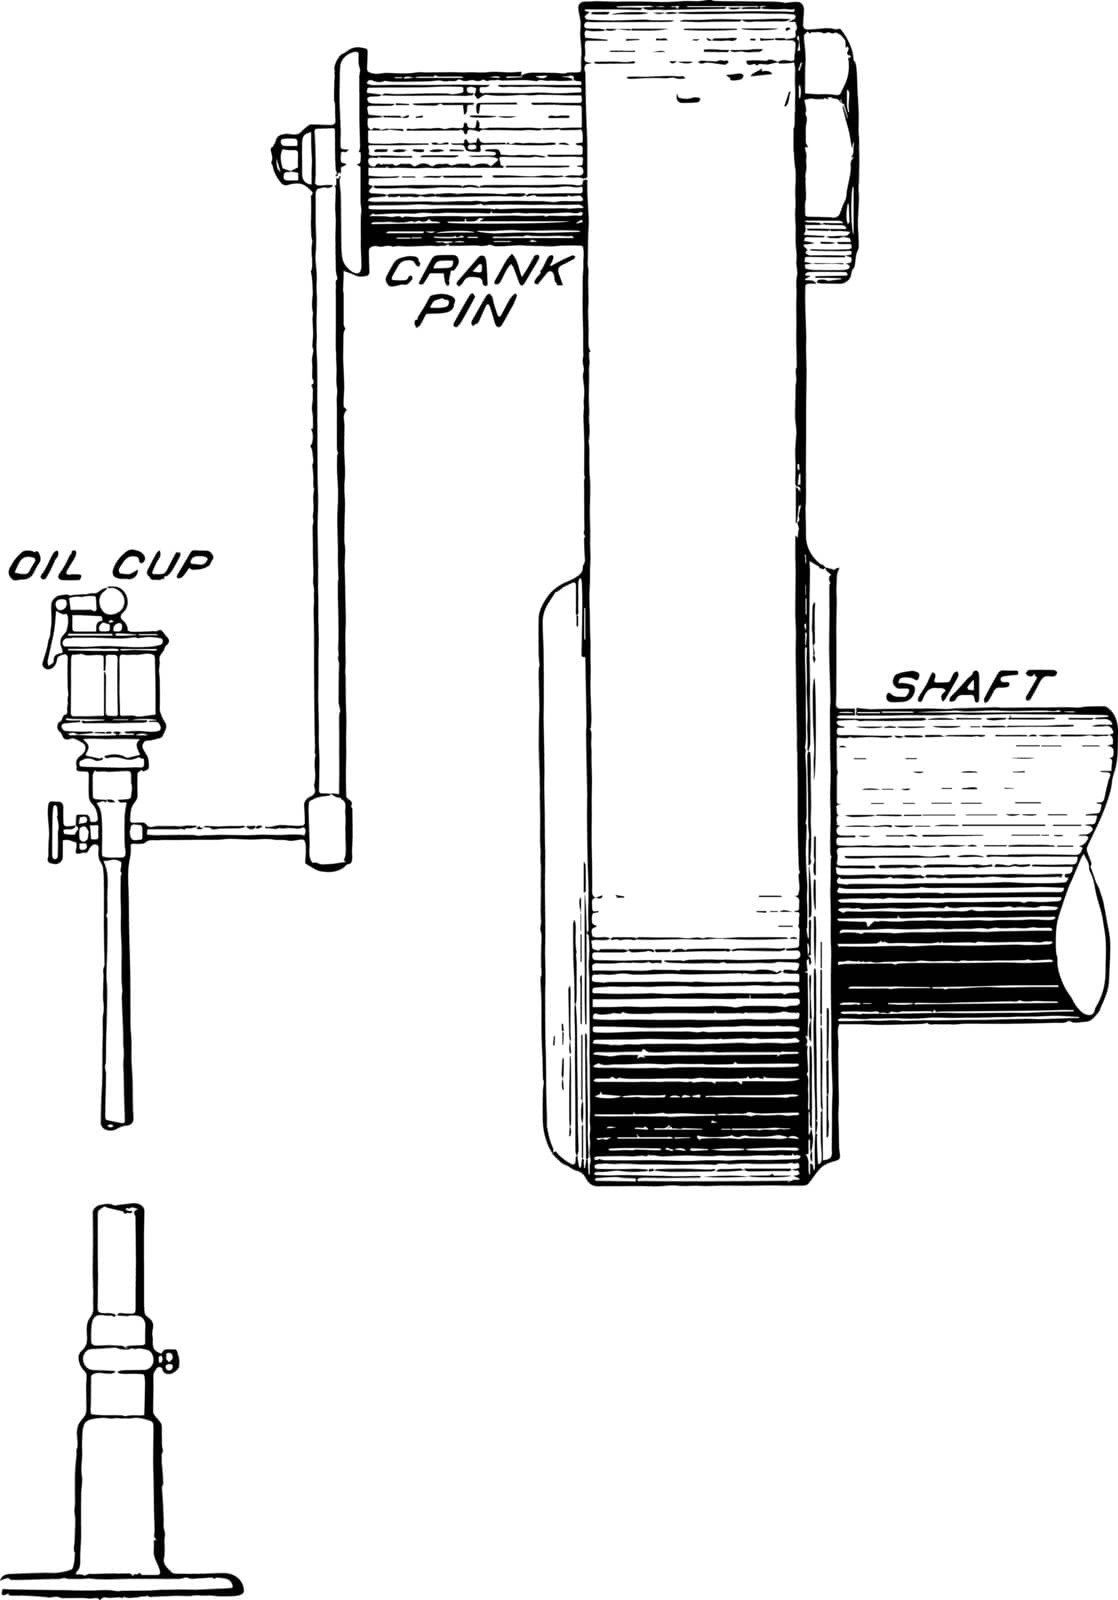 This illustration represents Belt Drive Oiling Apparatus which is used to oil the crank pin of the belt drive system vintage line drawing or engraving illustration.